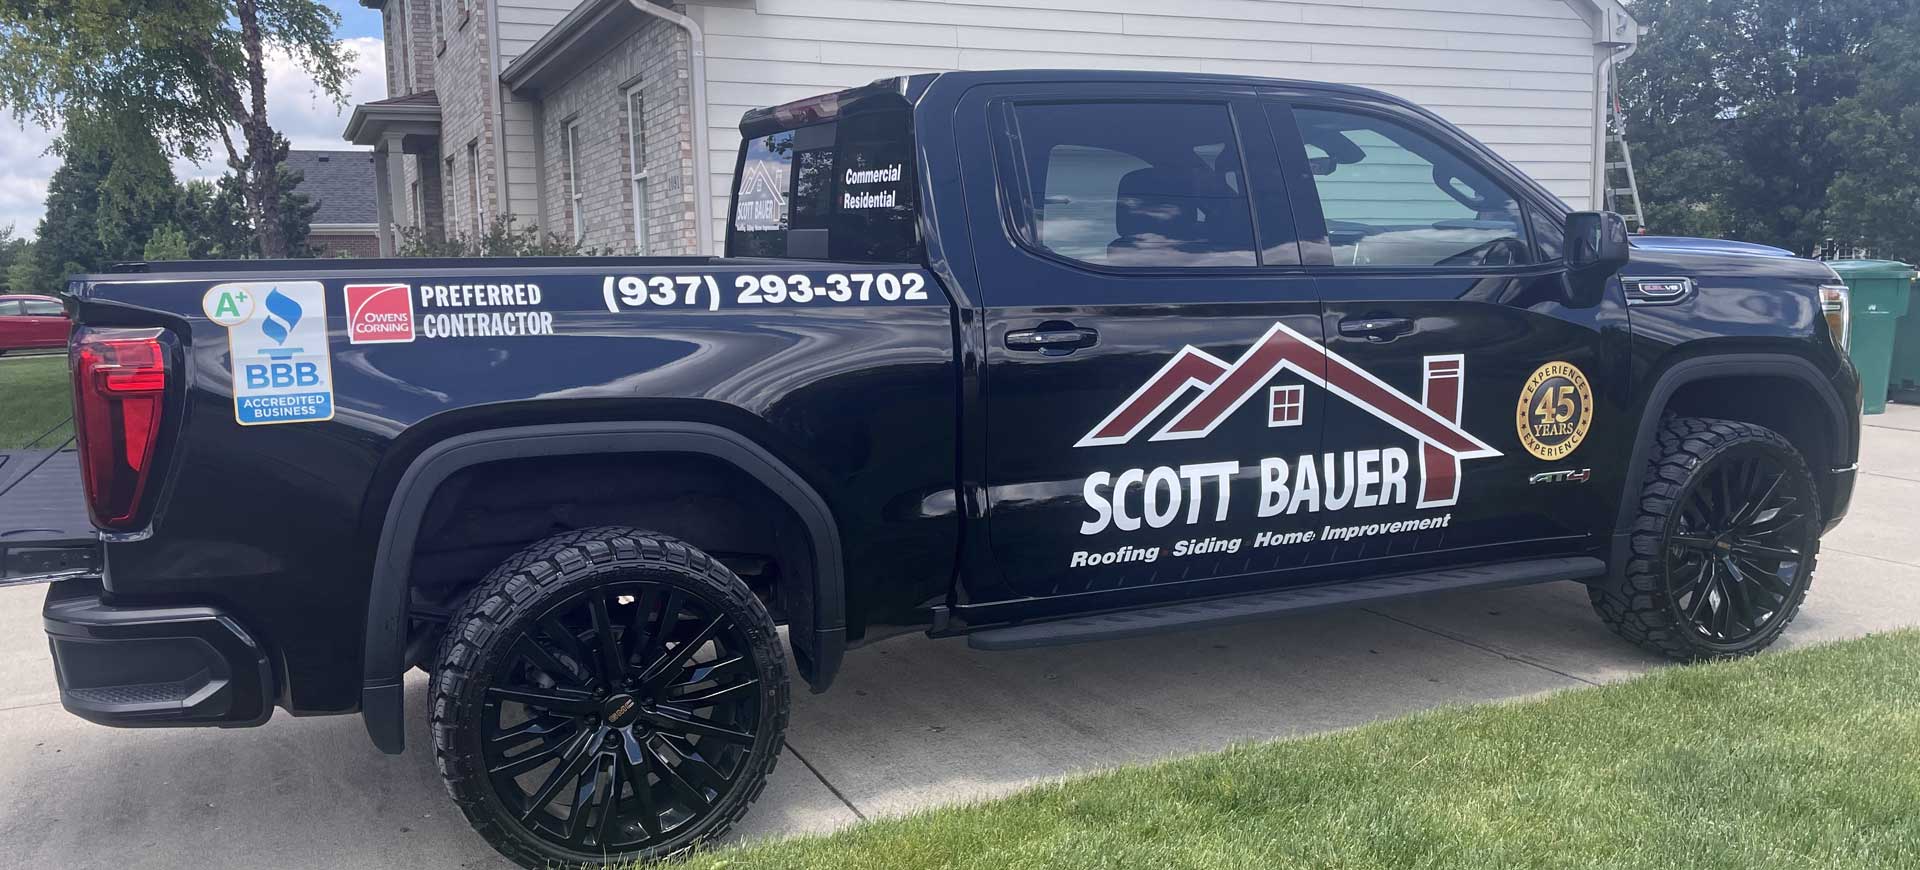 Scott Bauer Roofing and Siding Truck